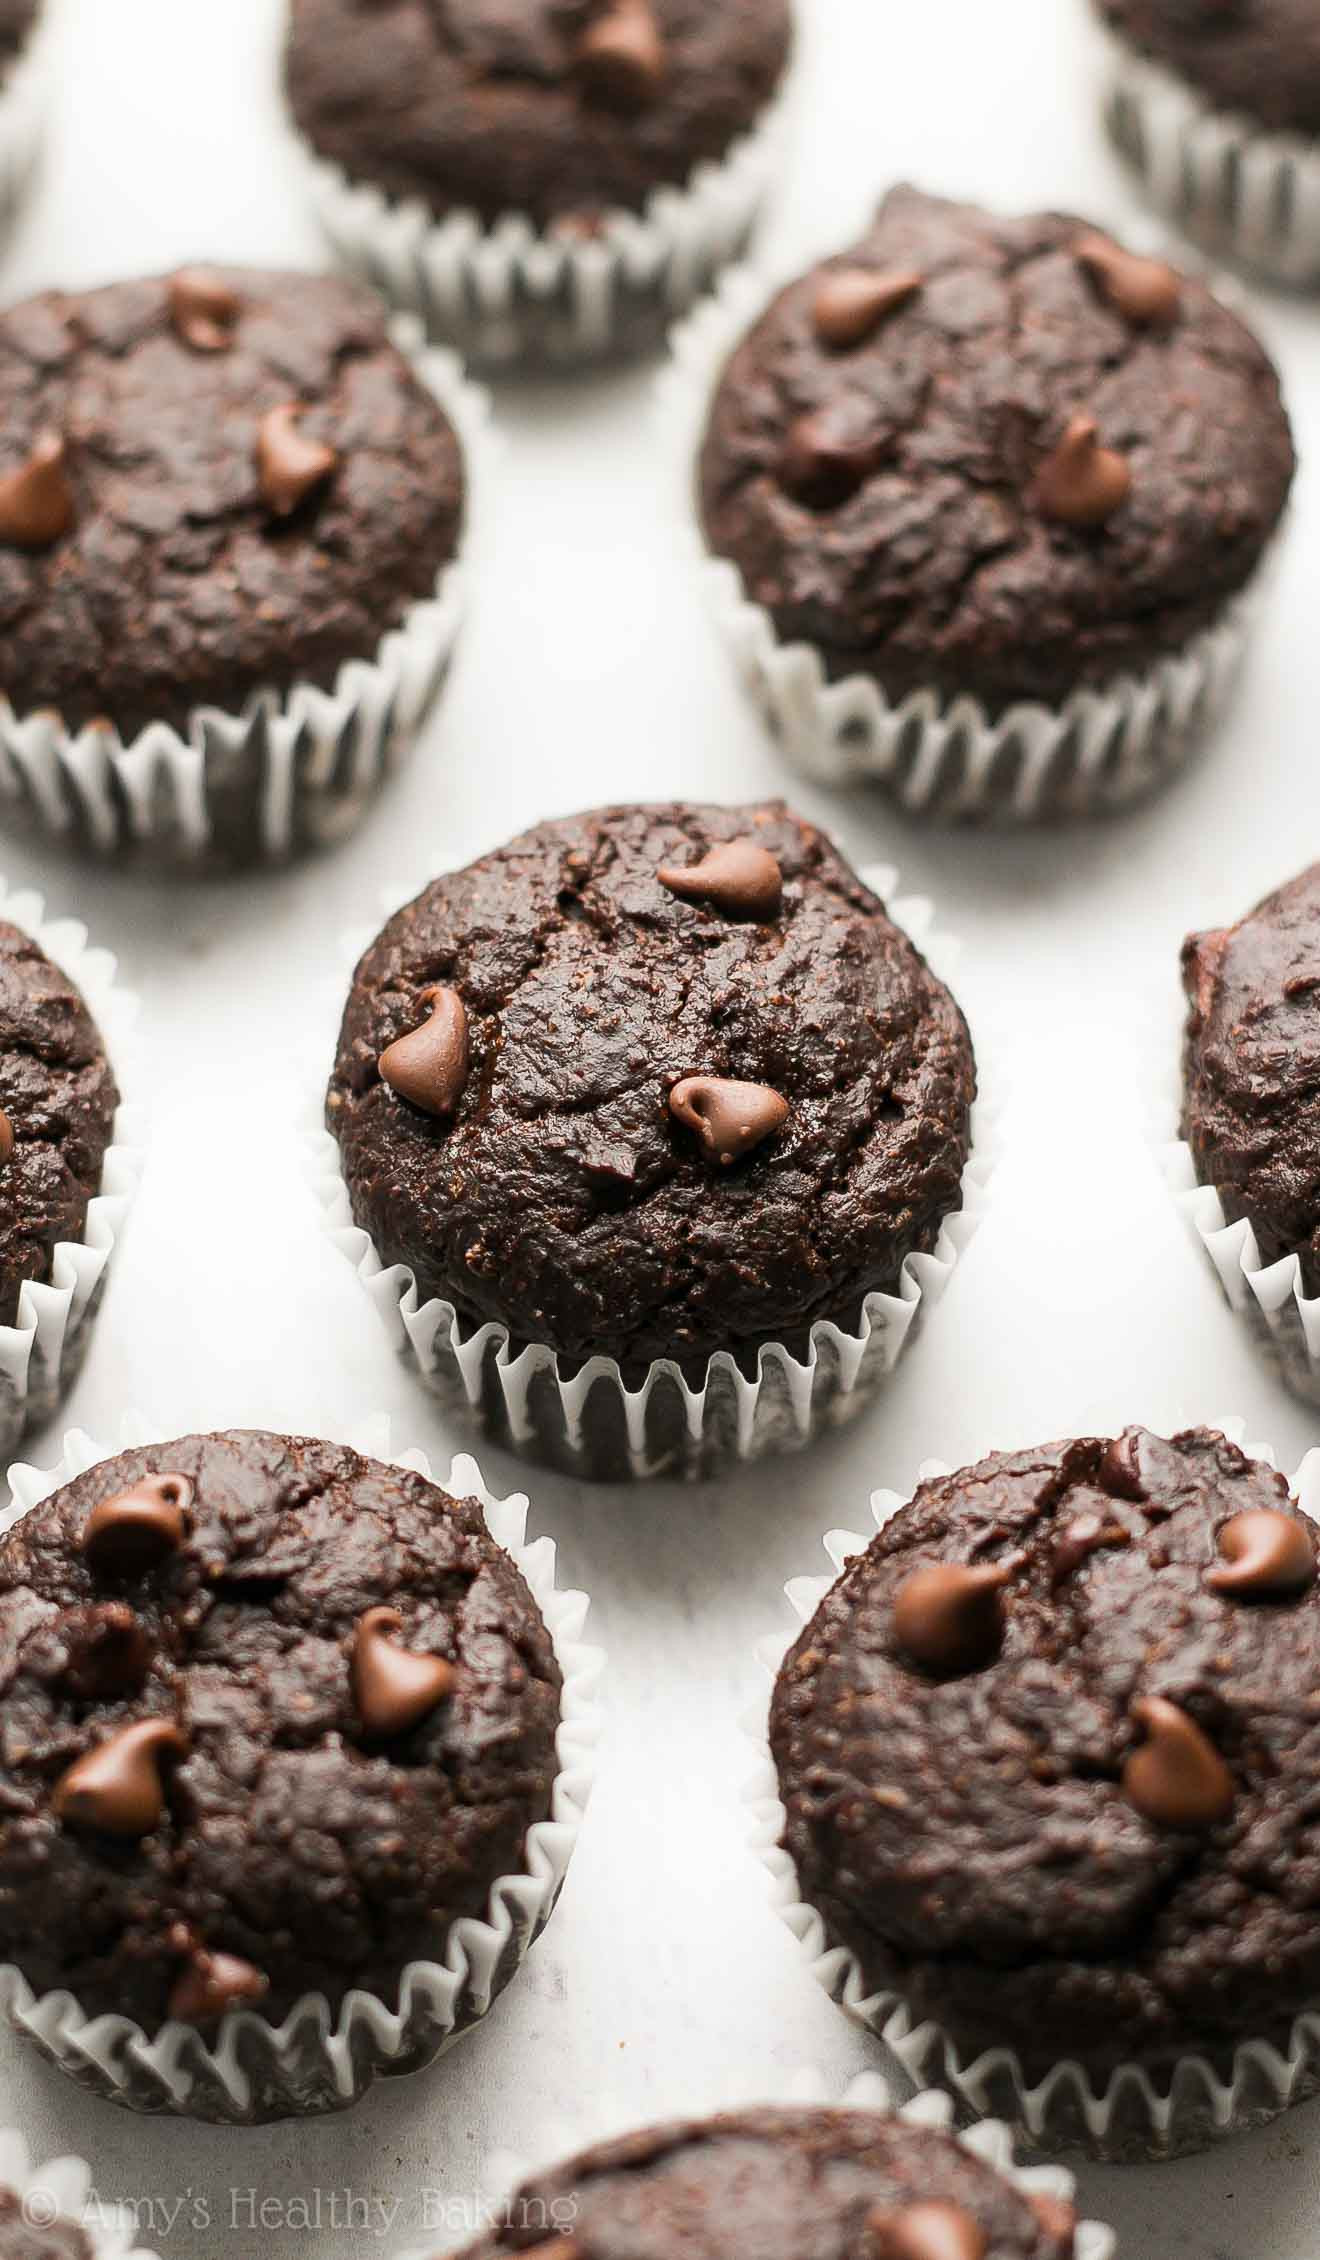 Chocolate Muffins Healthy
 The Ultimate Healthy Chocolate Mini Muffins